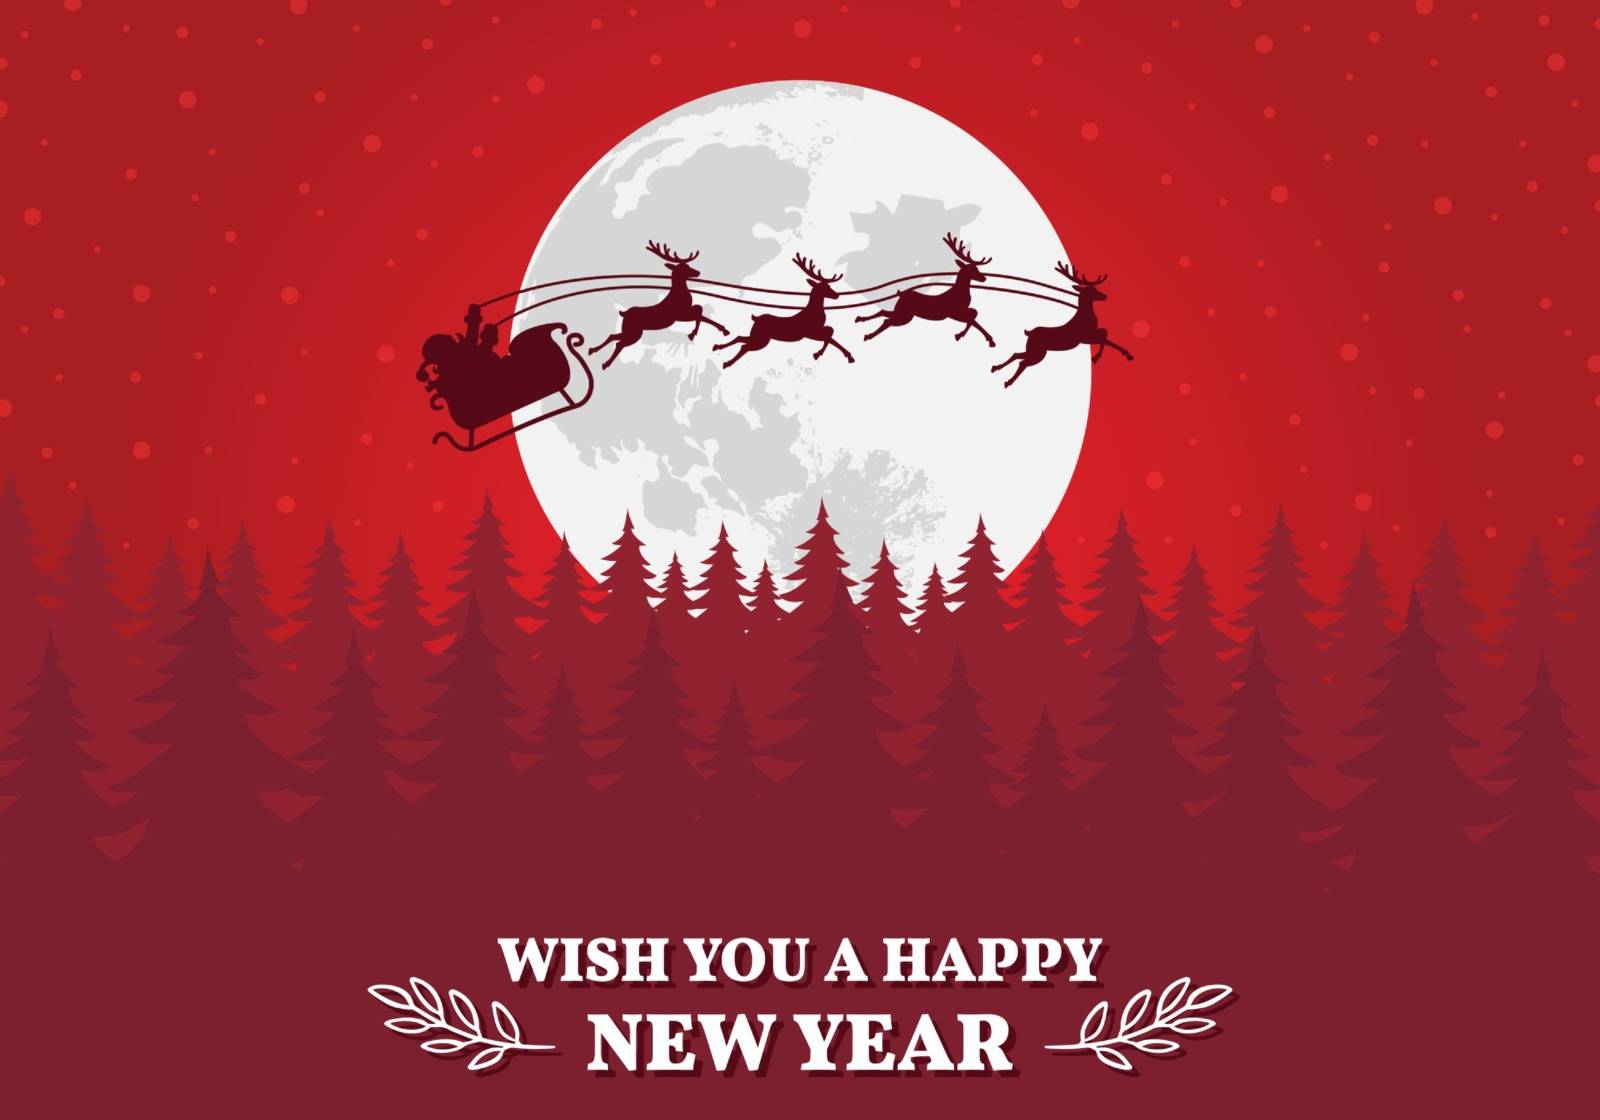 Merry Christmas and Happy New Year, Santa Claus in sleigh, Christmas landscape vector, background with moon and the silhouette of Santa Claus, Christmas scene with fir trees background